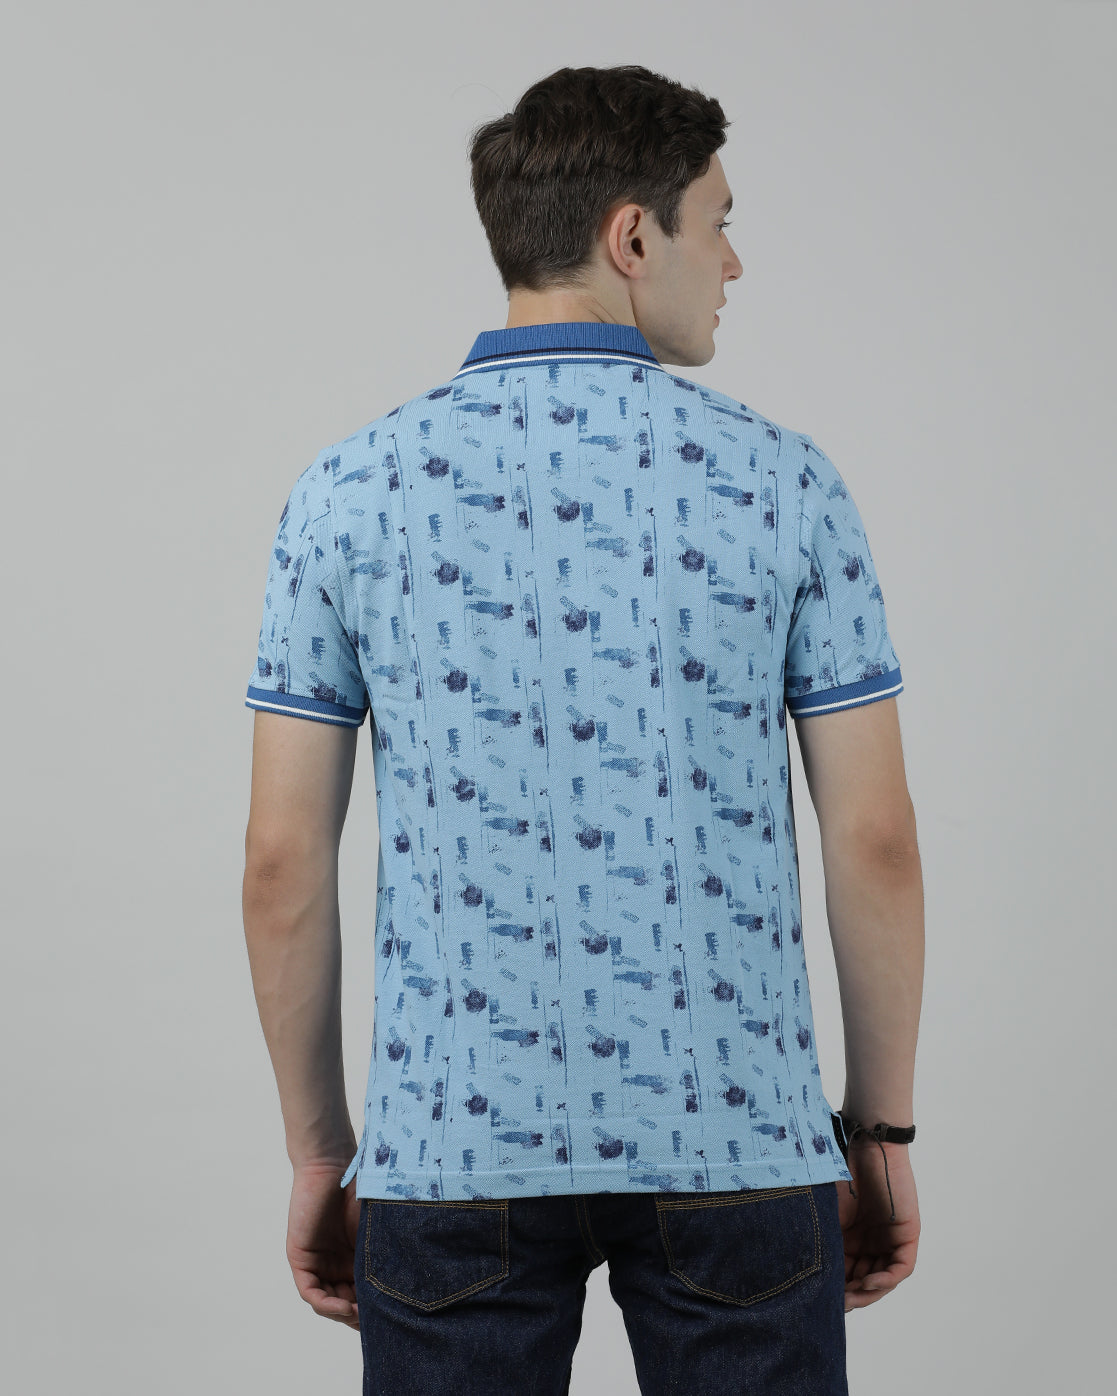 Casual Light Blue T-Shirt Polo Printed Half Sleeve Slim Fit with Collar for Men